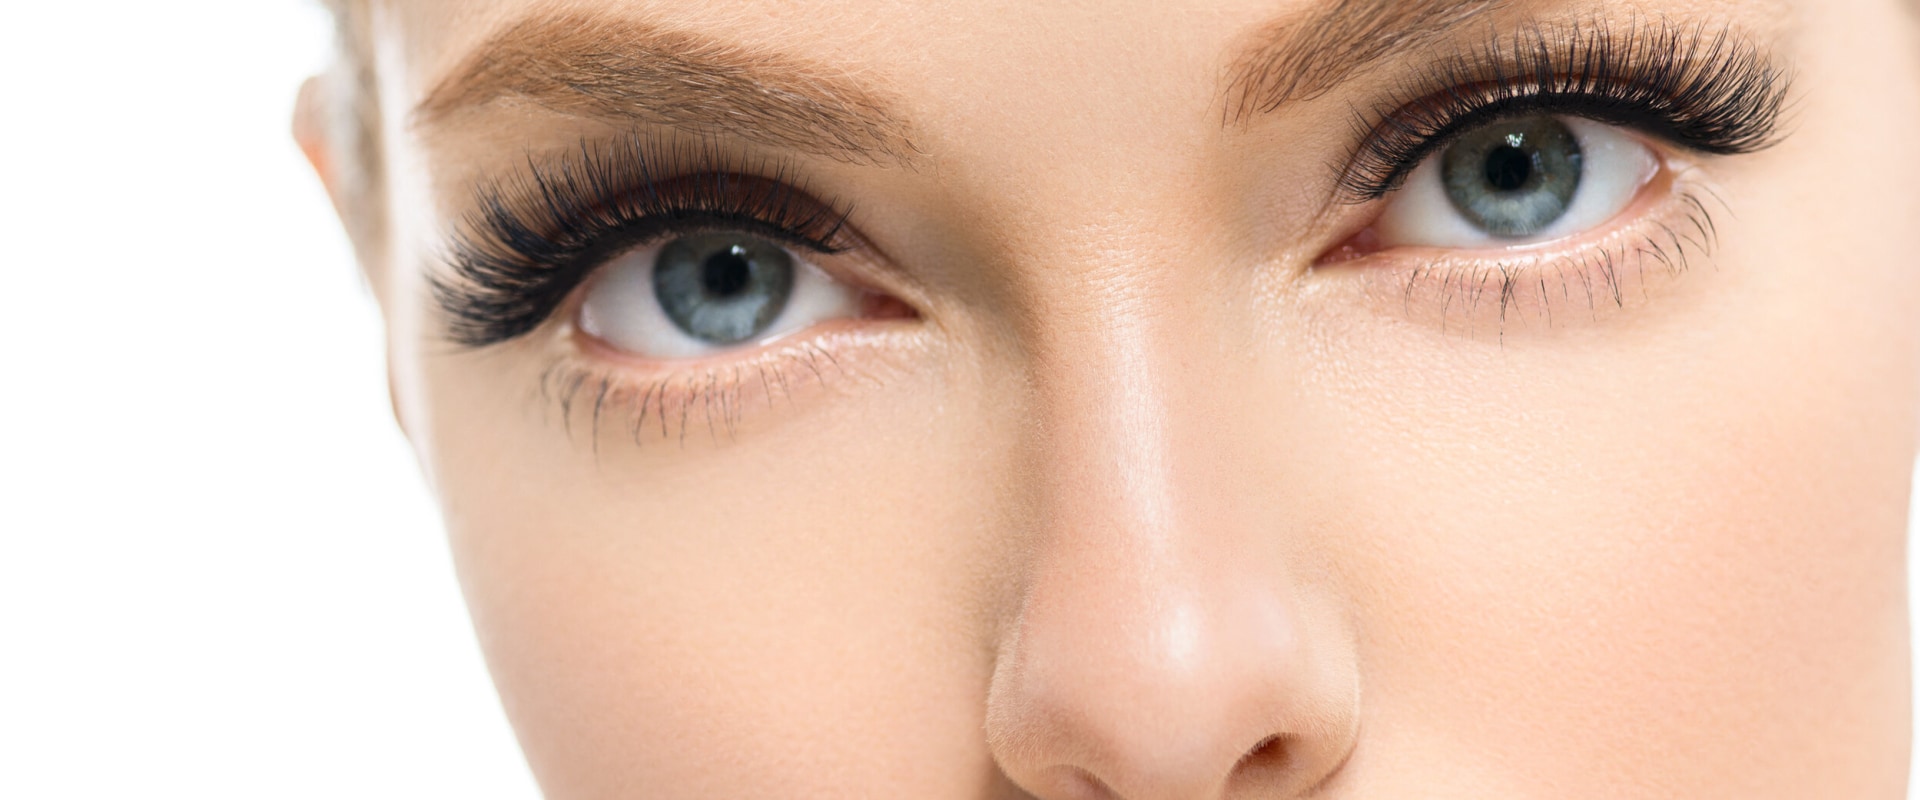 How many kind of eyelash extension?